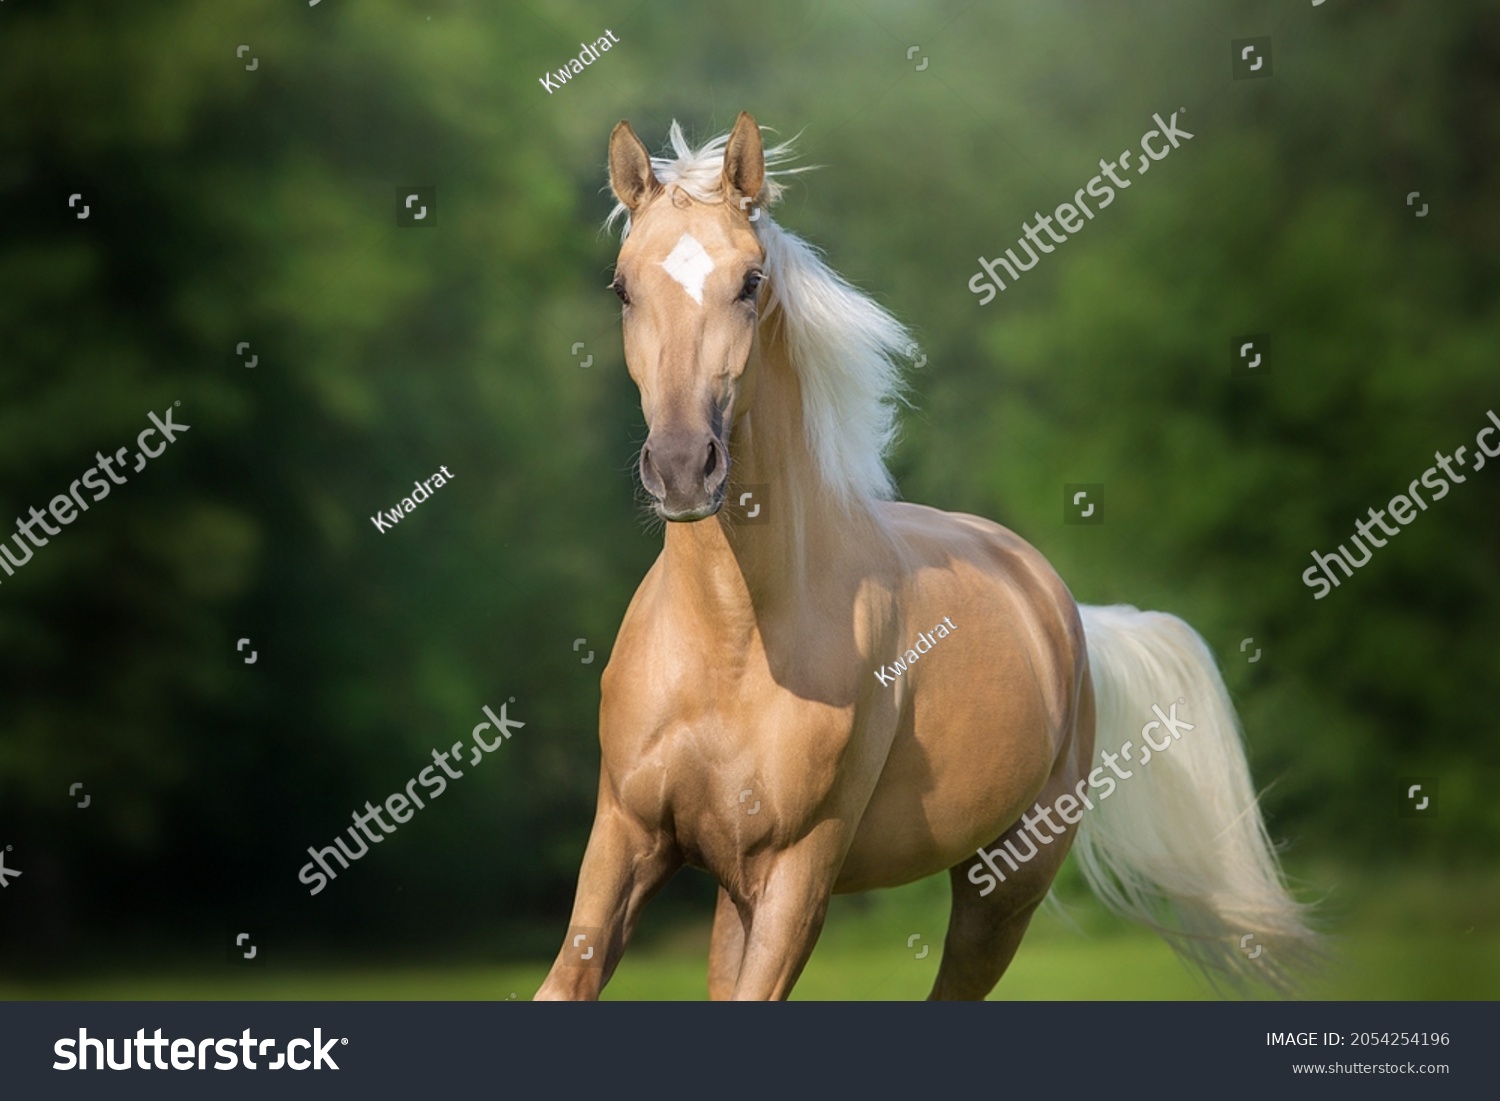 Cremello horse with long mane free run in green meadow close up portrait #2054254196